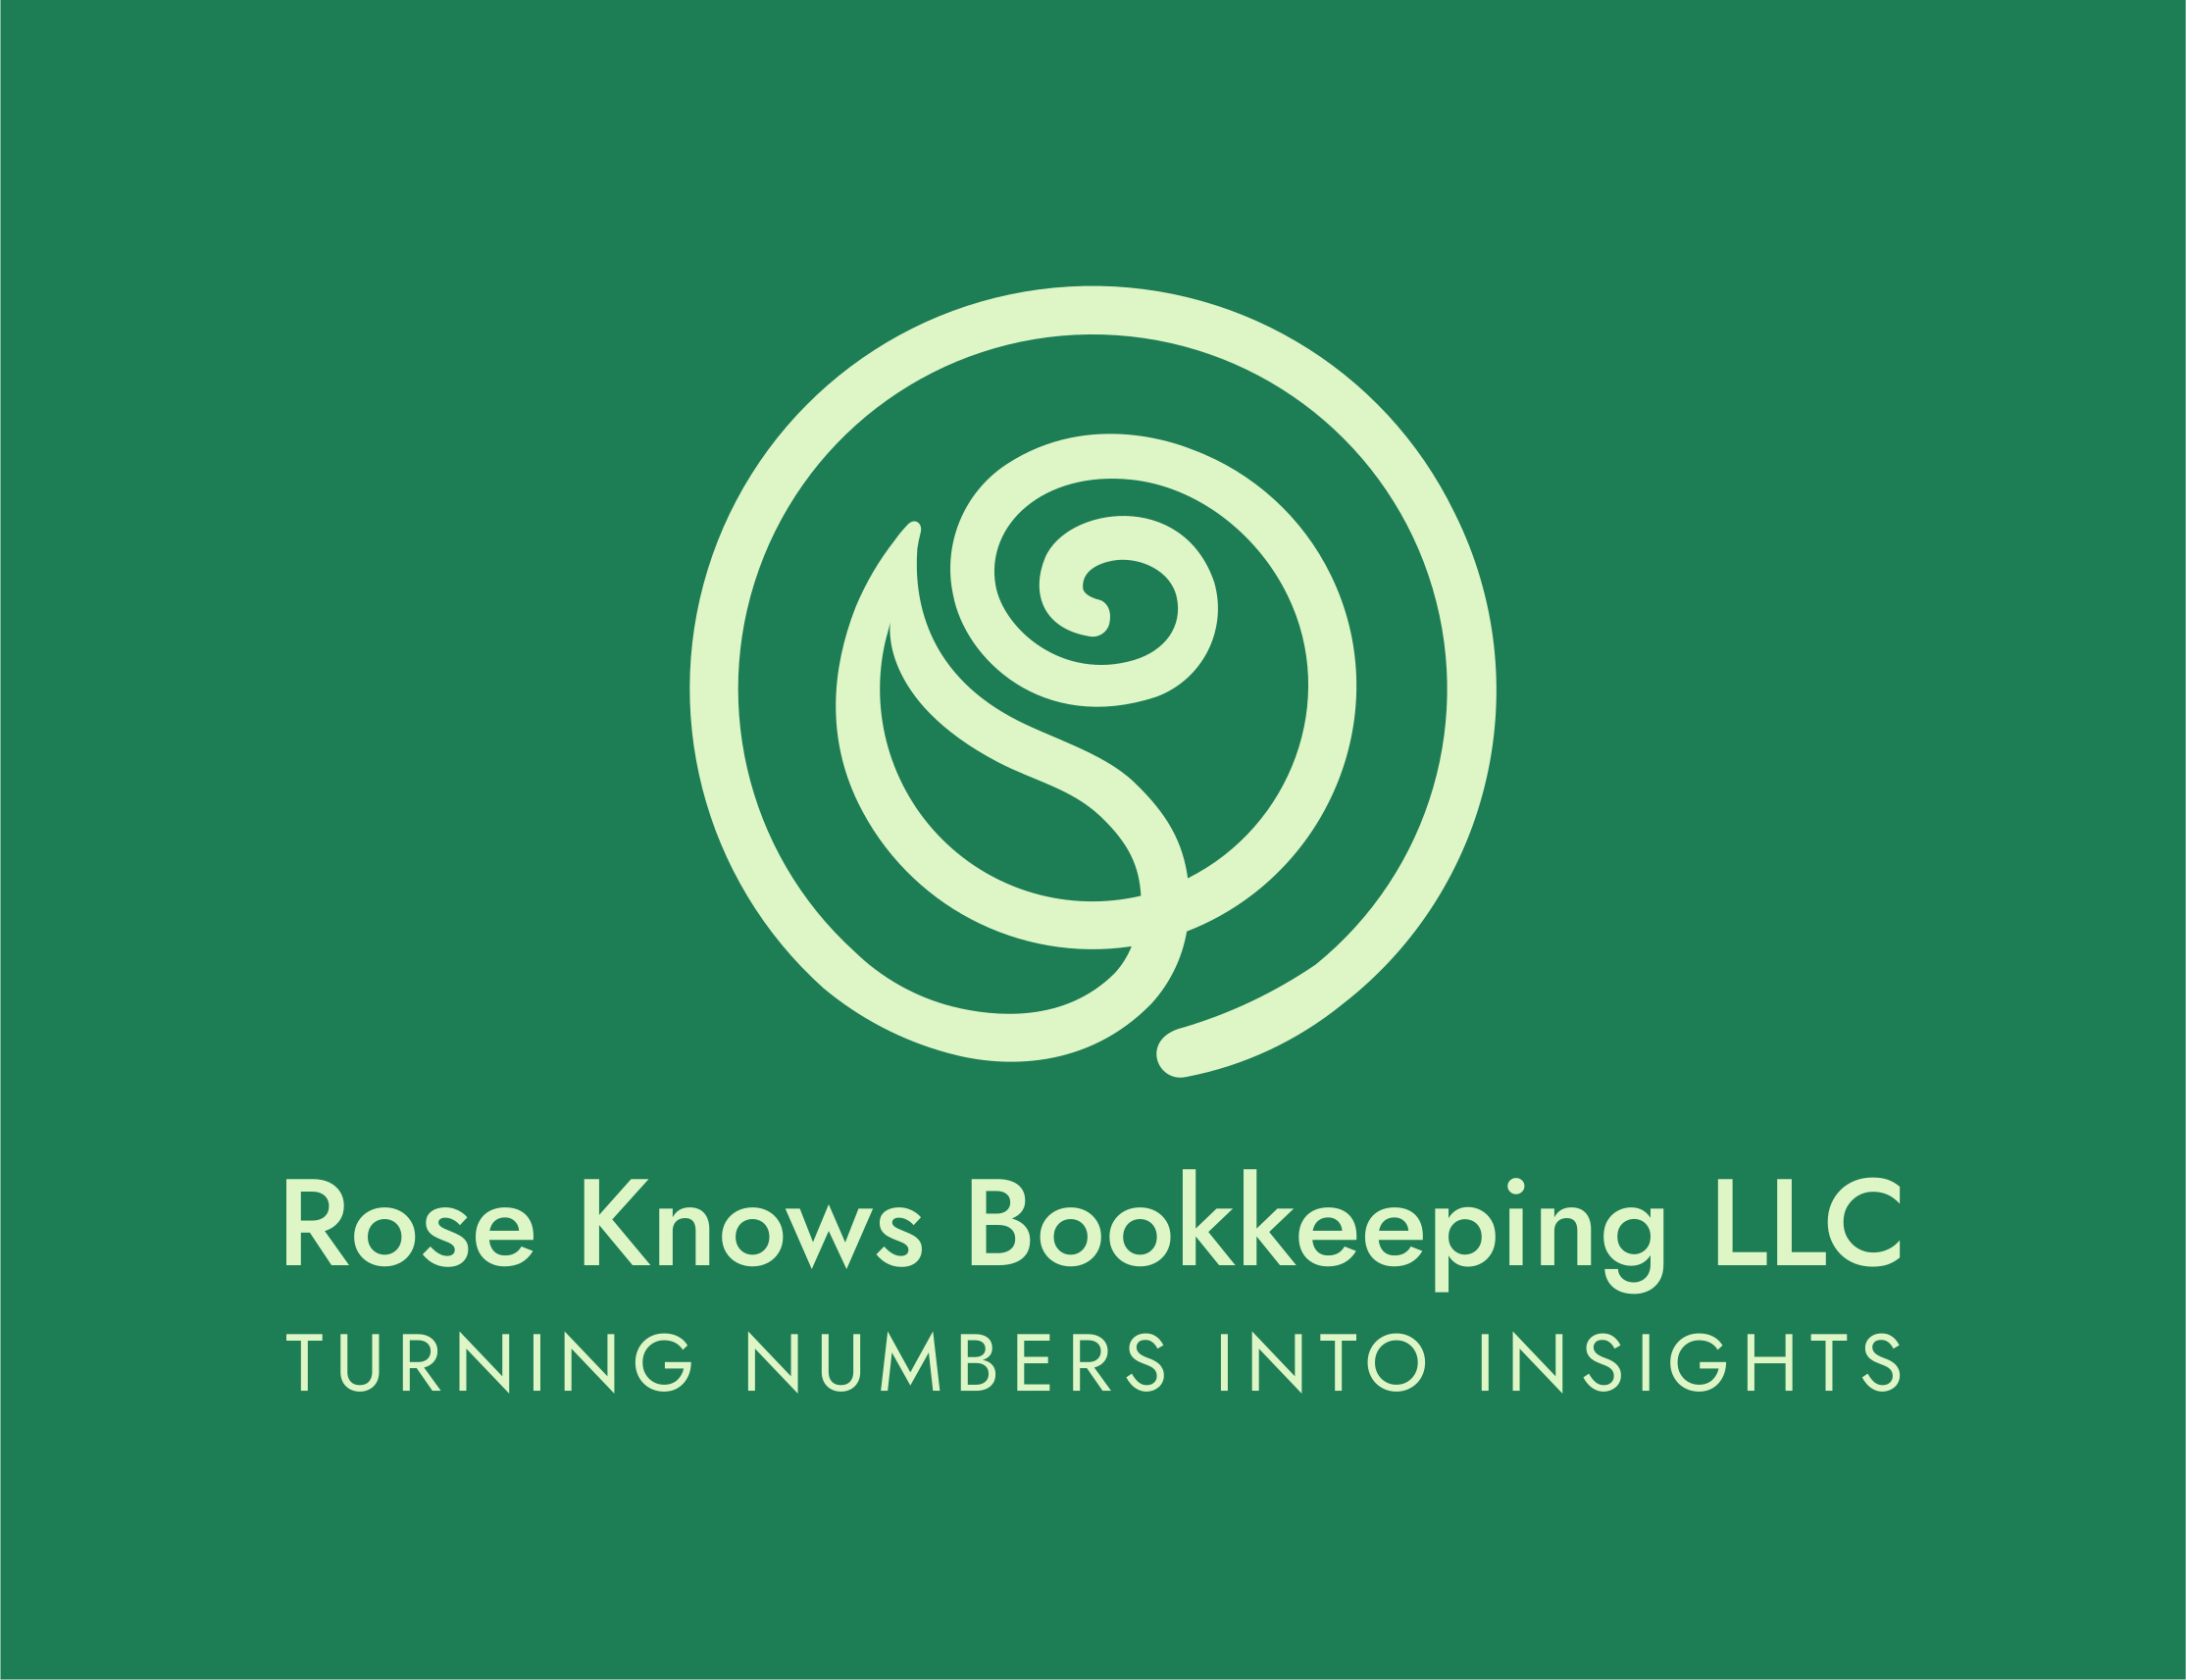 Rose Knows Bookkeeping